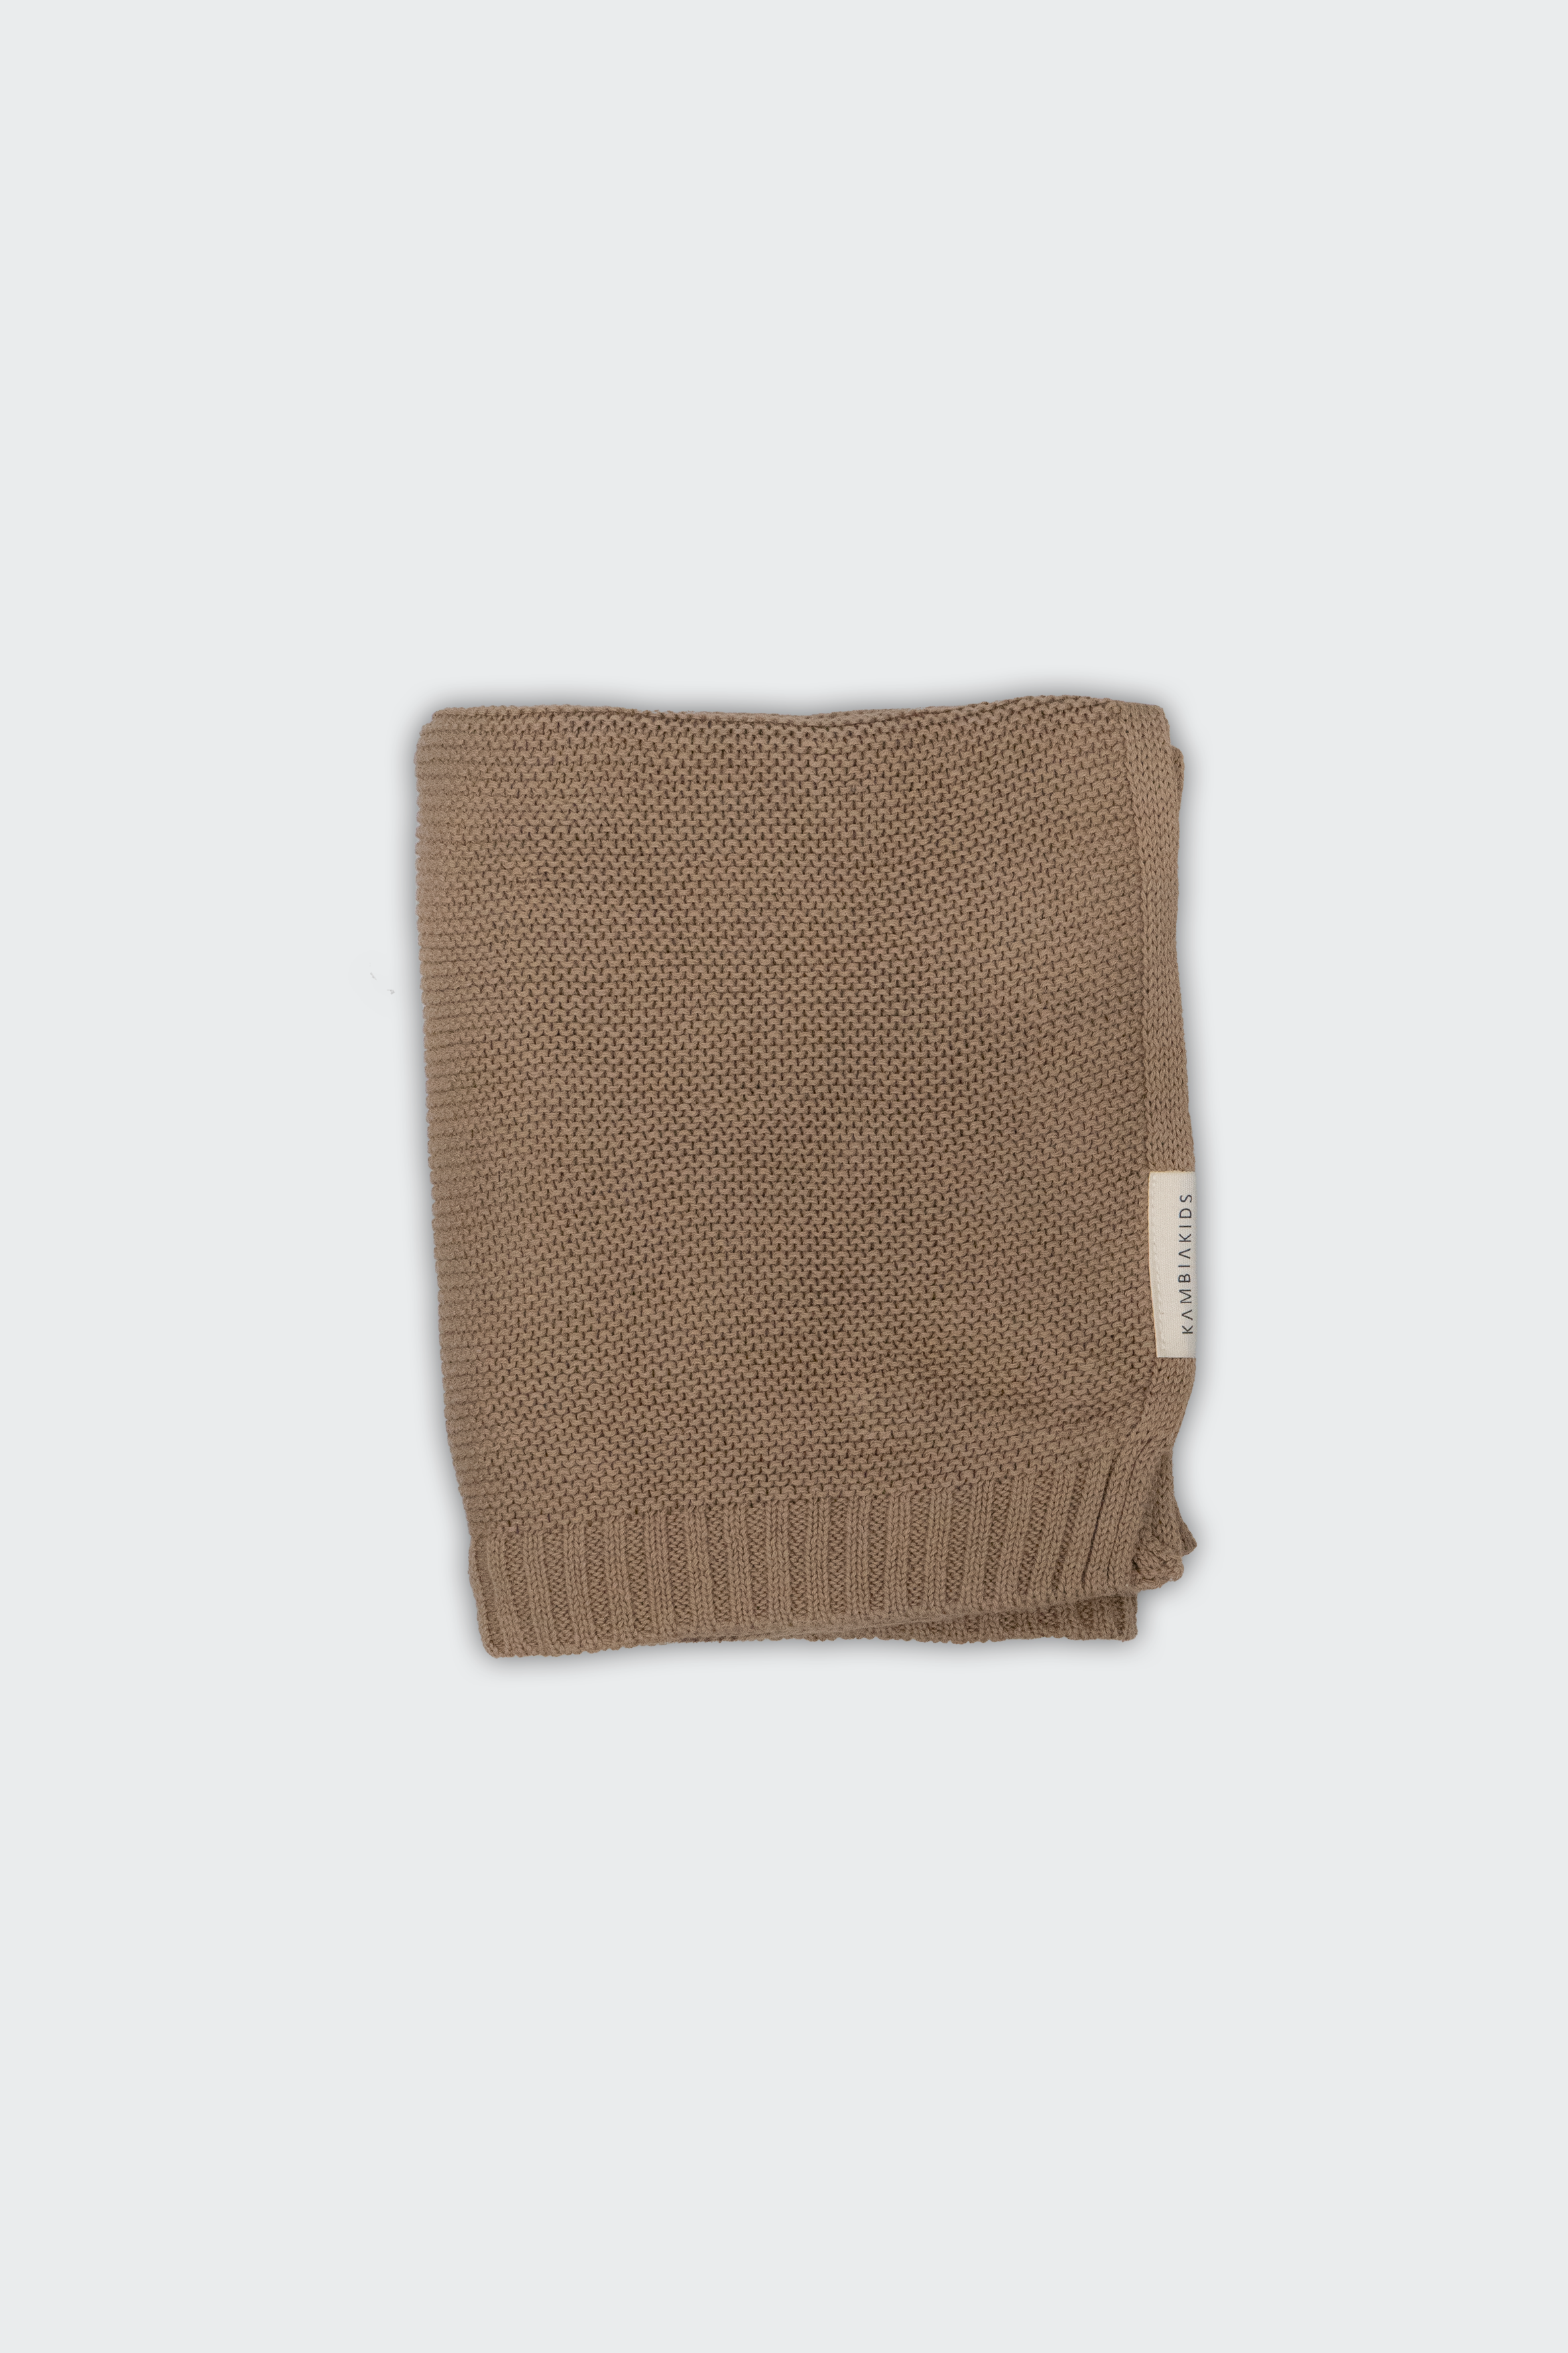 COTTON KNITTED BABY BLANKET | CINNAMON